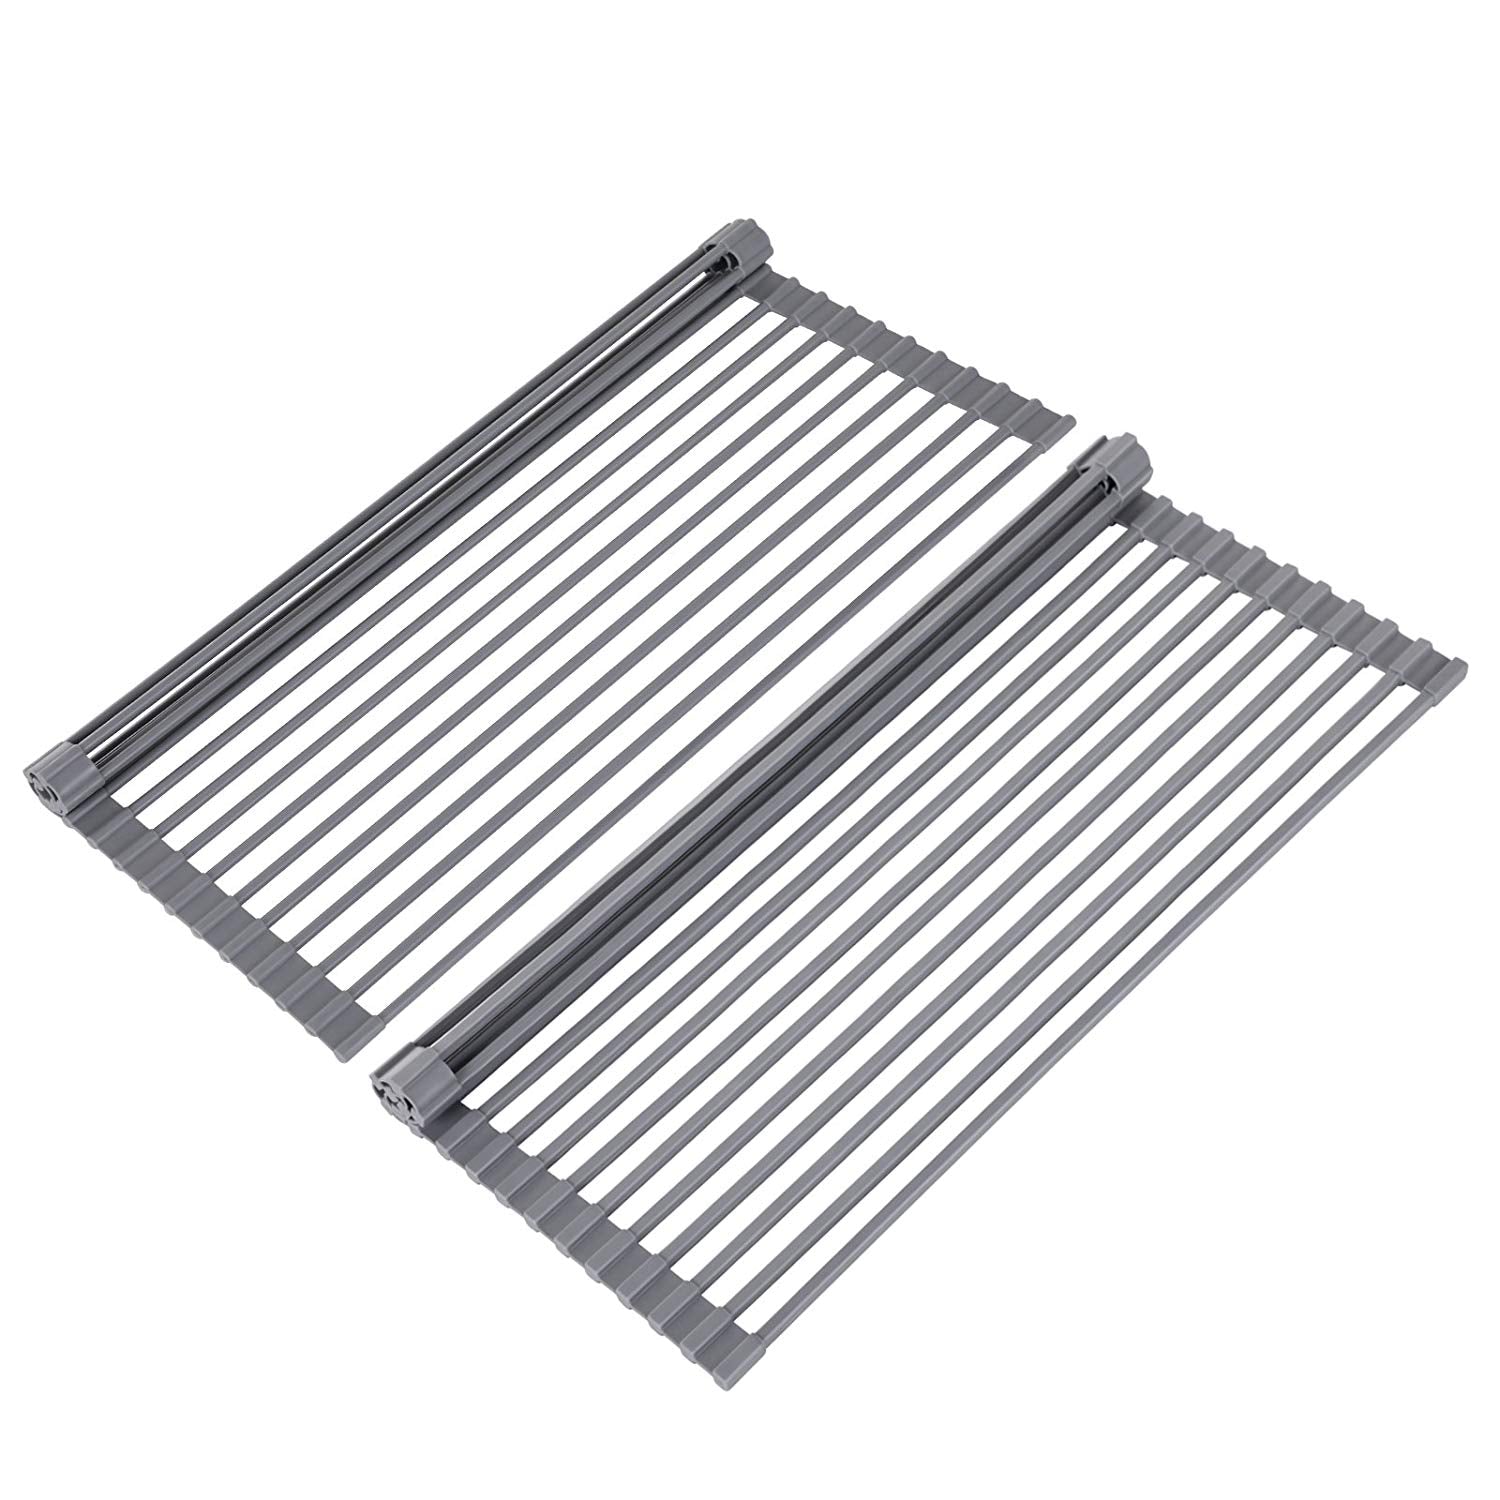 SONGMICS 2 Pack Roll-Up Dish Drainer Sink, Multipurpose Drying Rack, Kitchen Countertop-20 1/2”L x 13 3/8”W UKDR12GY (Circular Ro, Circular & Square Rods Gray